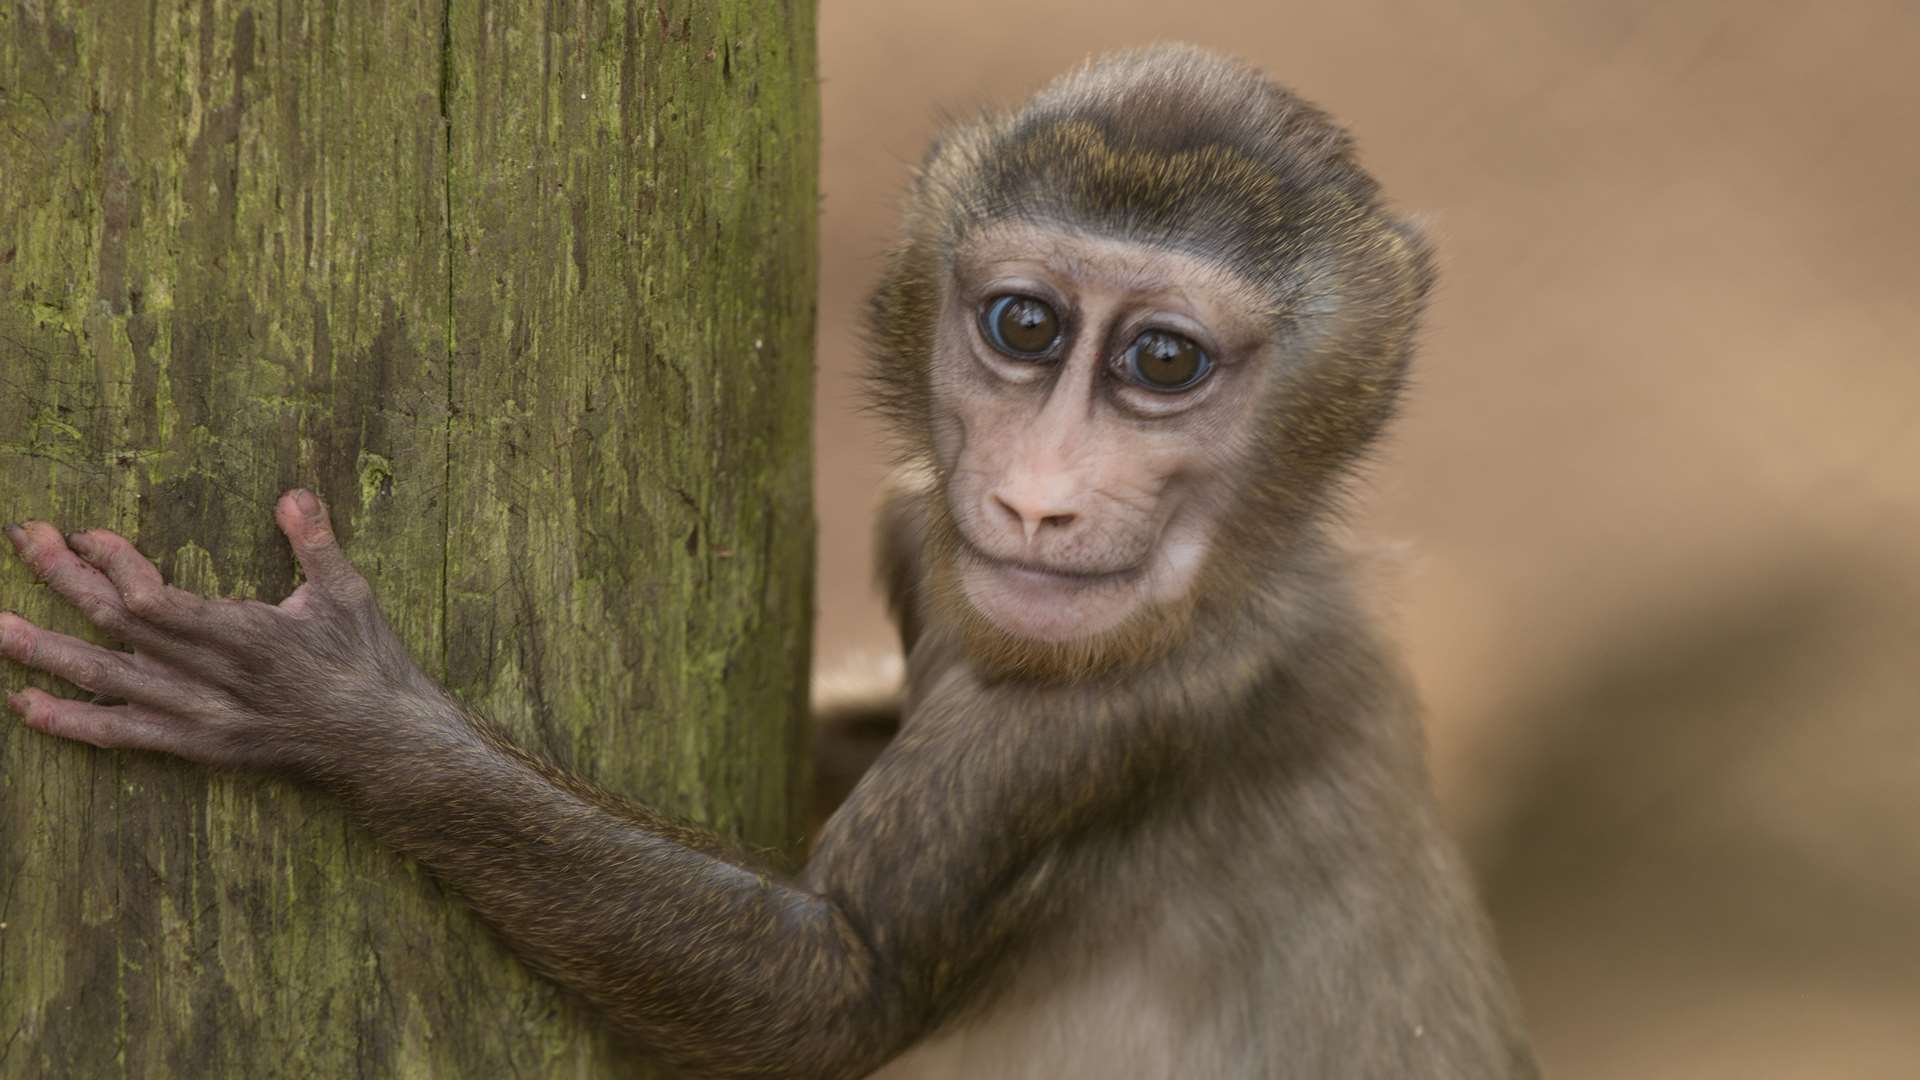 The new baby drill monkey at Port Lympne.